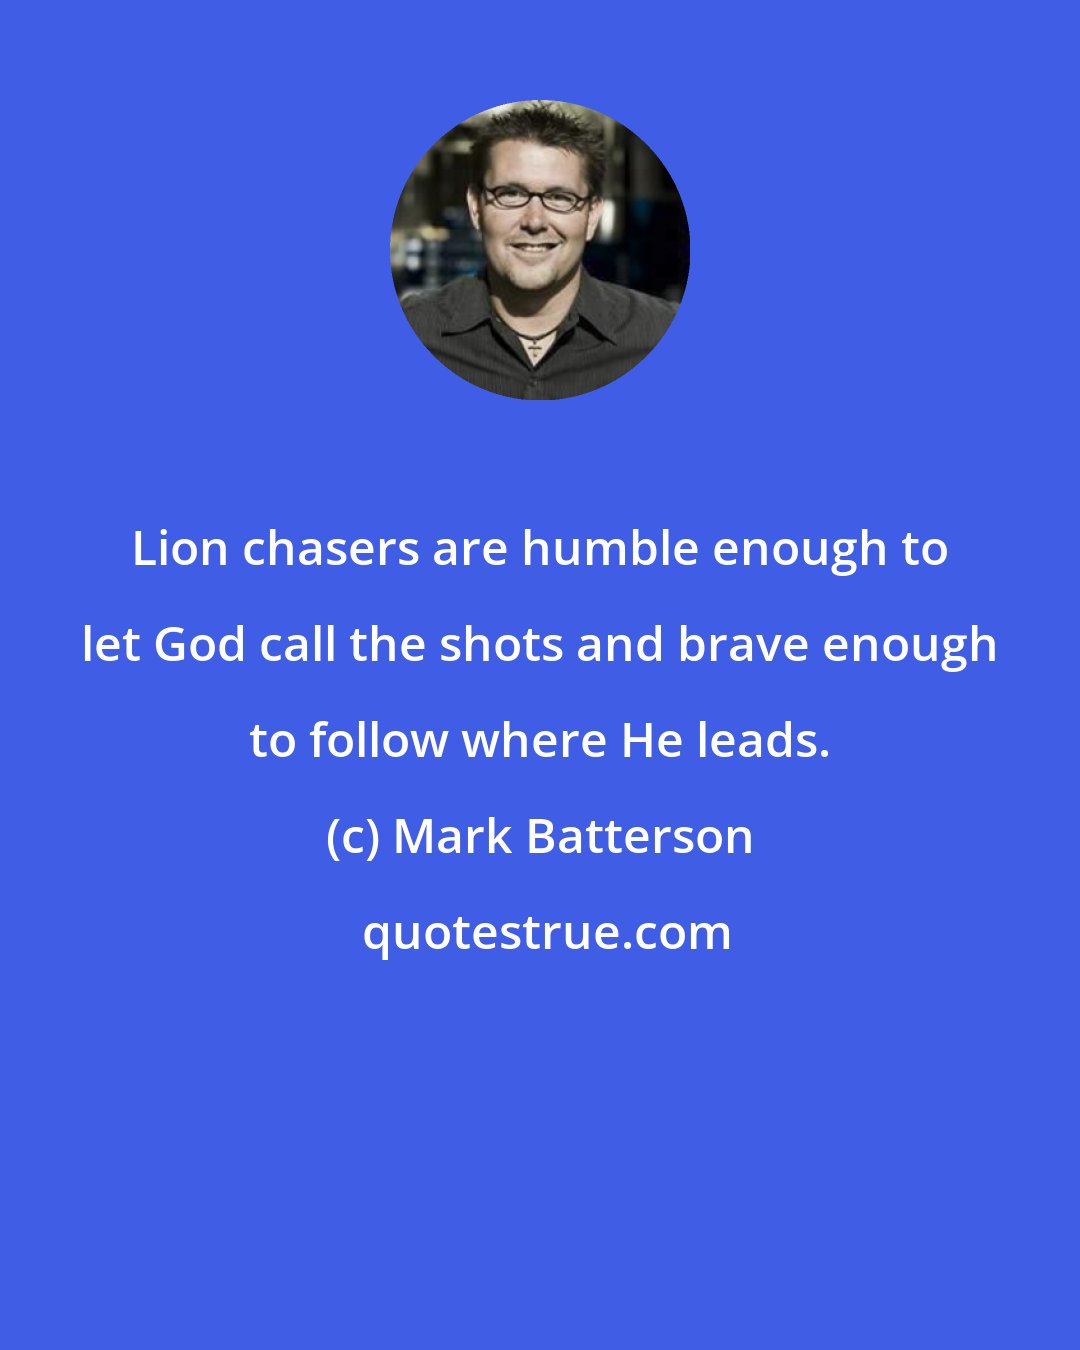 Mark Batterson: Lion chasers are humble enough to let God call the shots and brave enough to follow where He leads.